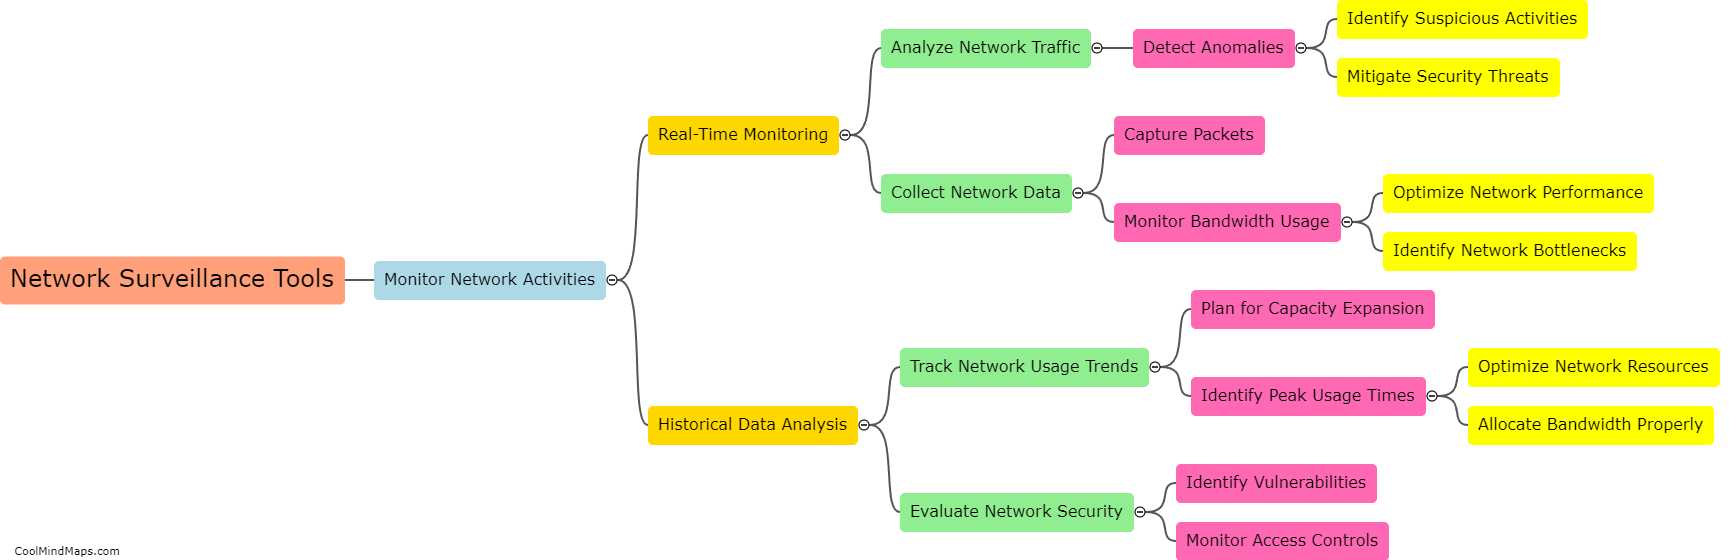 How do network surveillance tools help in monitoring network activities?